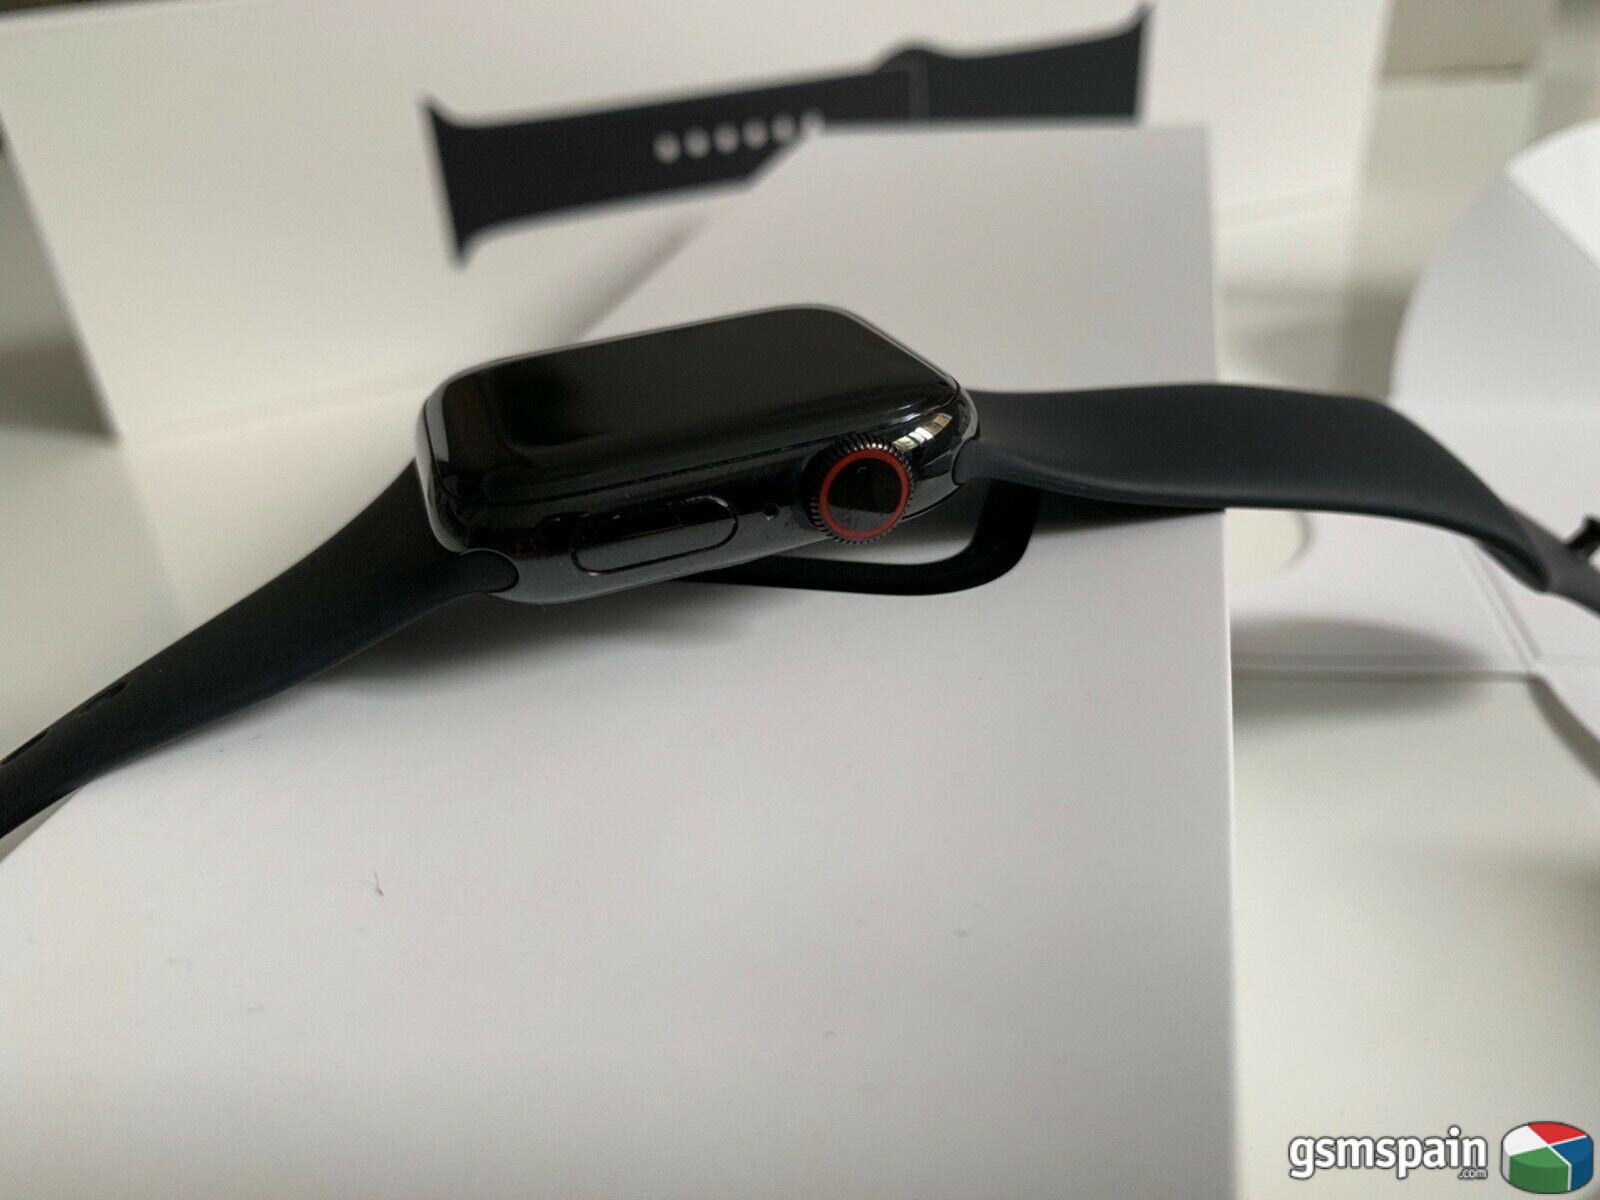 [VENDO] Apple Watch Series 4, Space Black, Stainless Steal Case, Black Sport Band con Celular